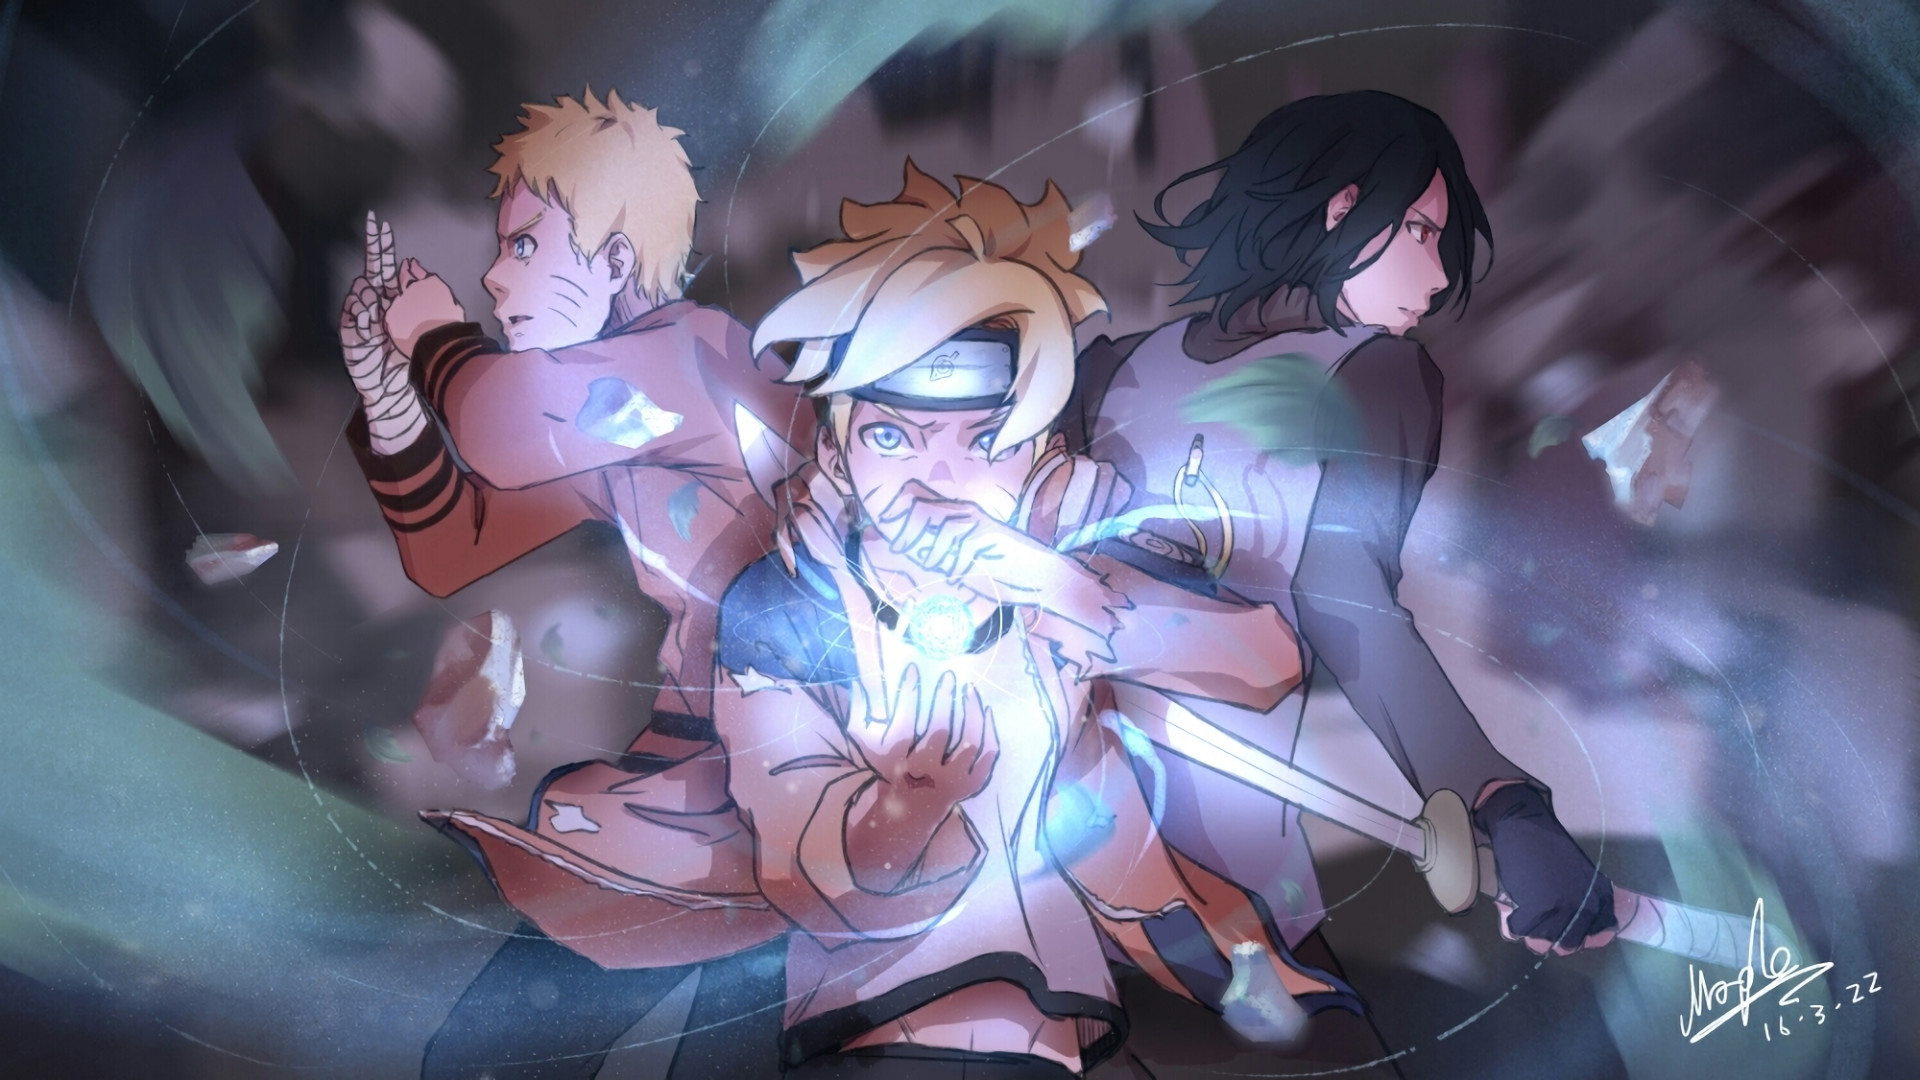 1920x1080 Explore More Wallpapers in the Boruto Subcategory!